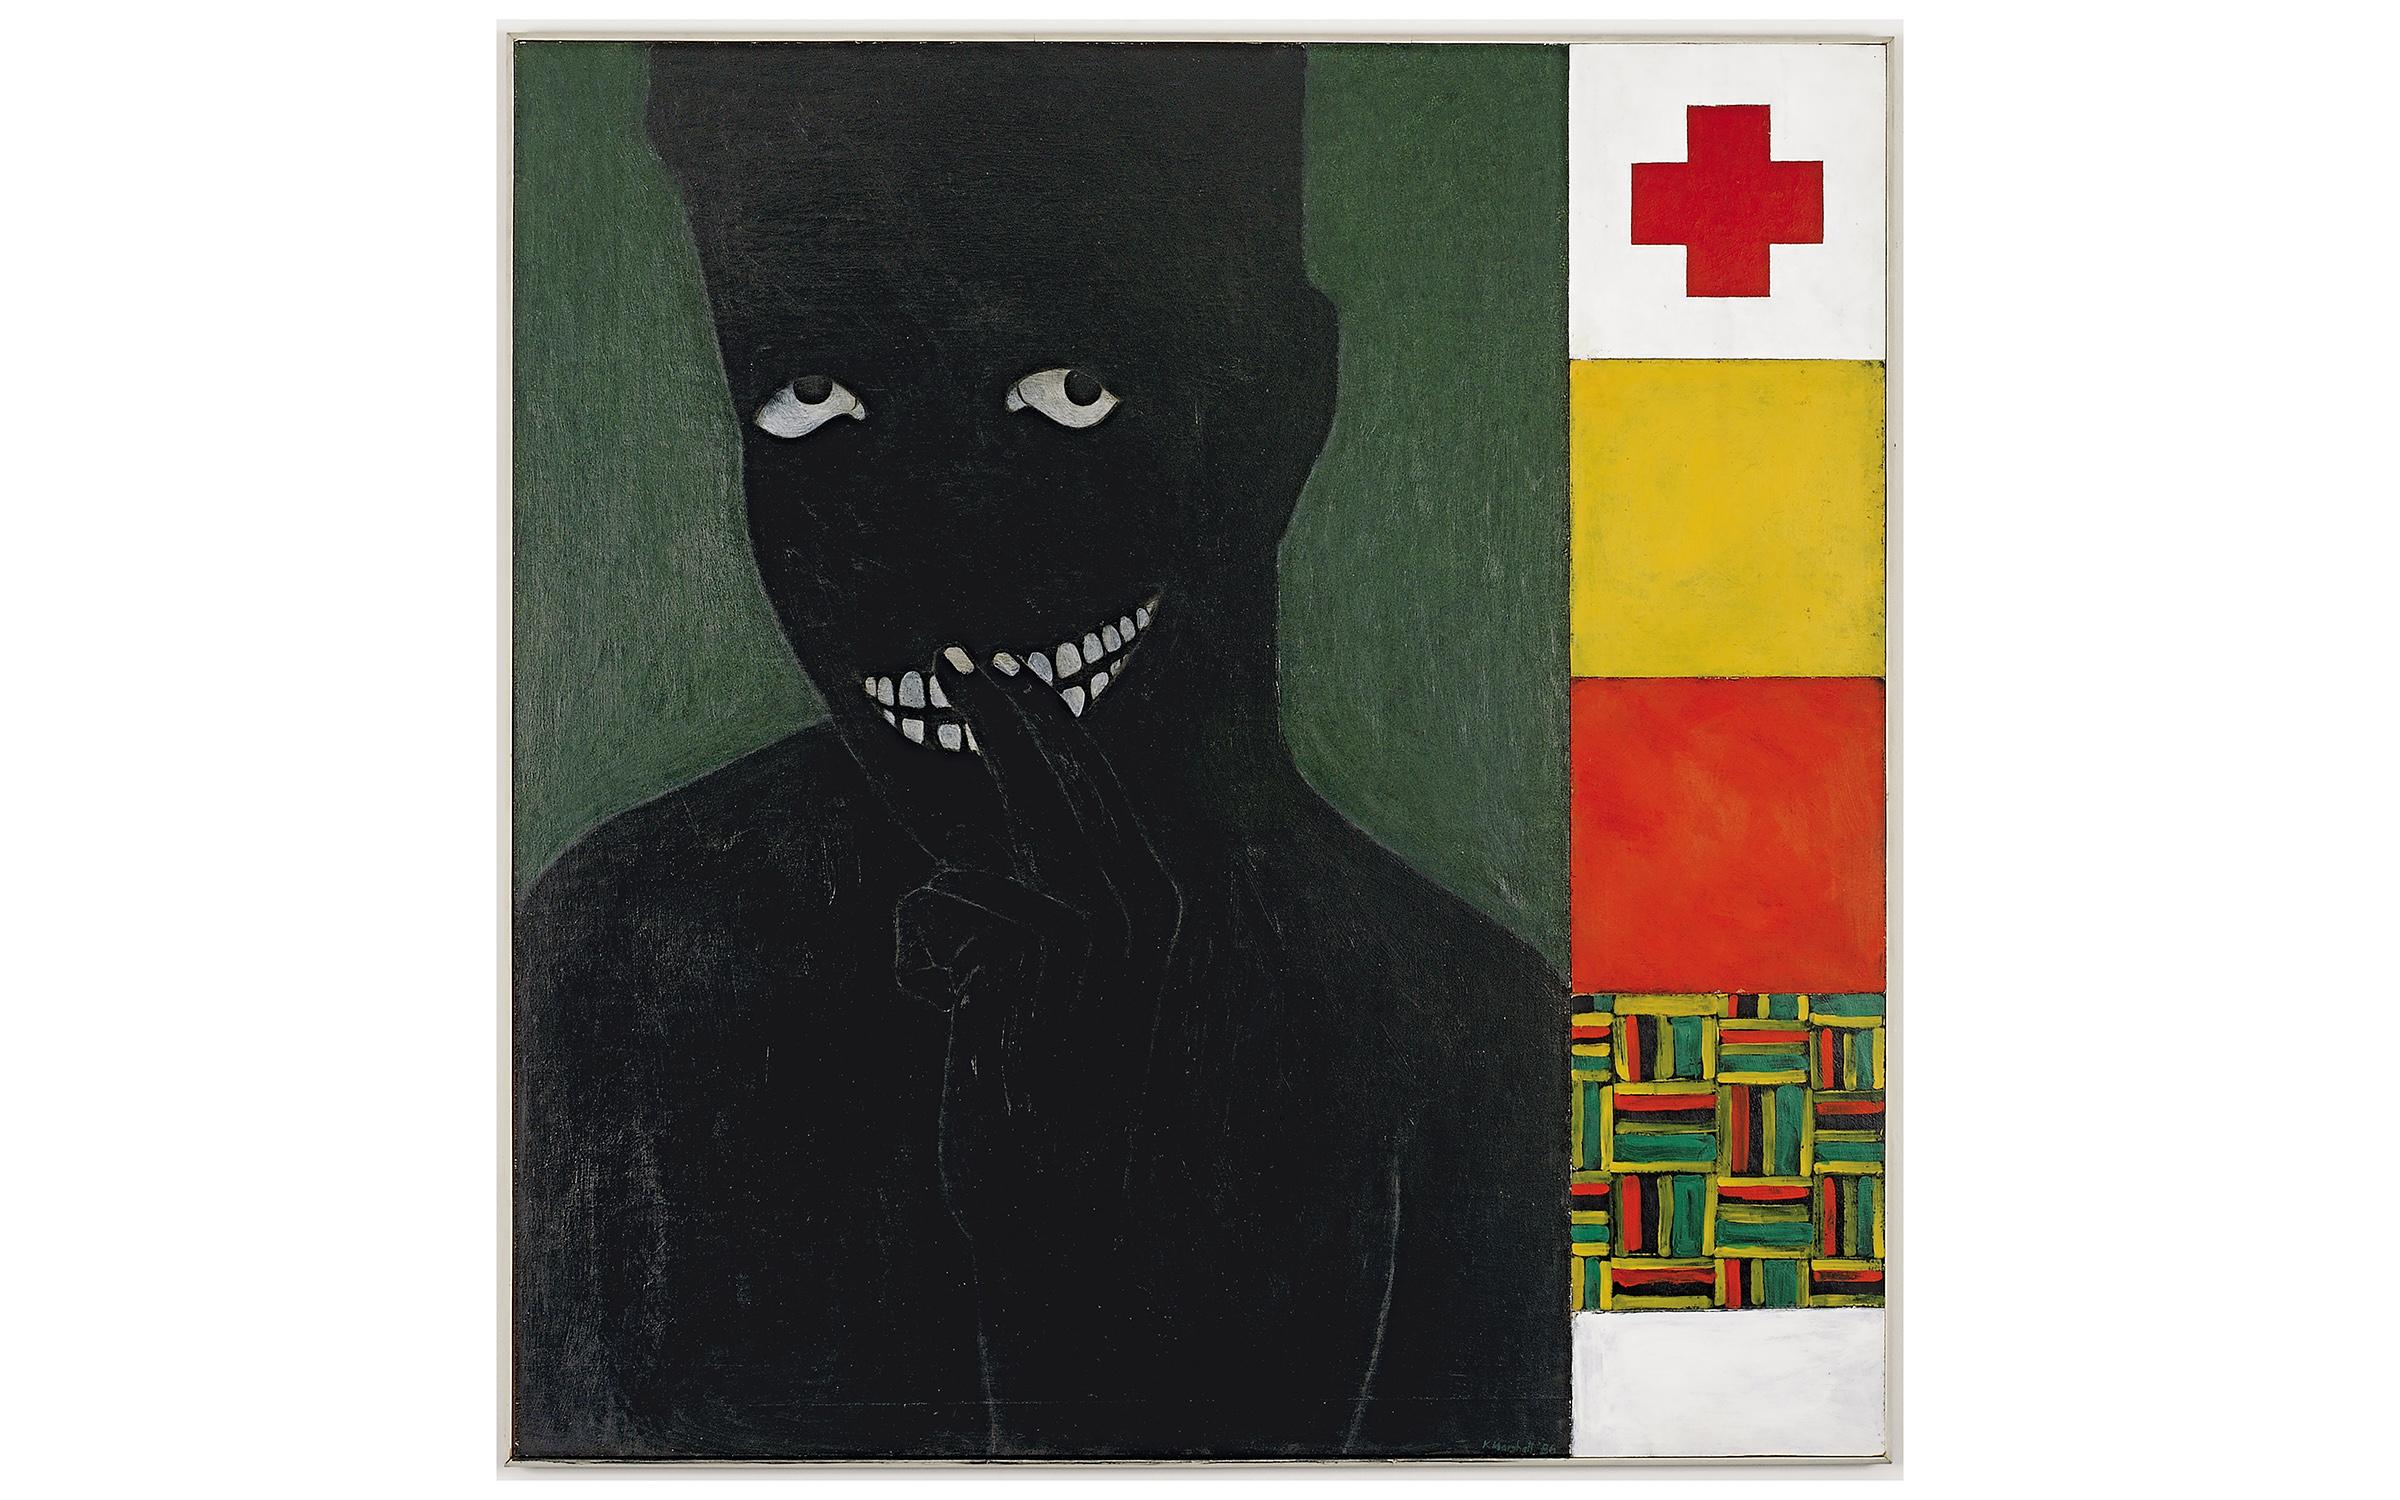 Kerry James Marshall, Silence is Golden, 1986